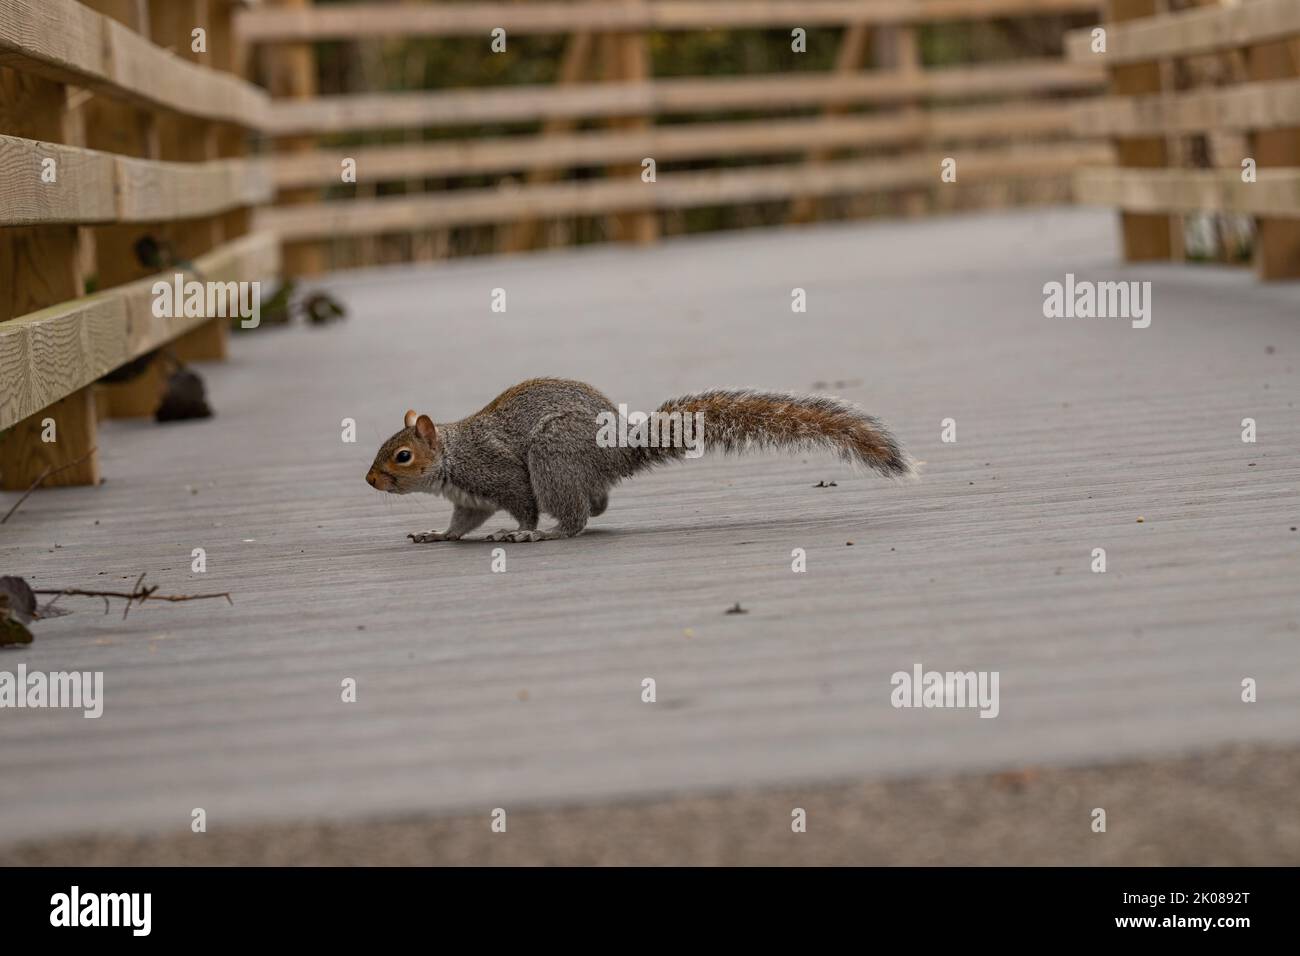 Close ups of a Grey Squirrel foraging on the ground in a park and eating peanuts Stock Photo